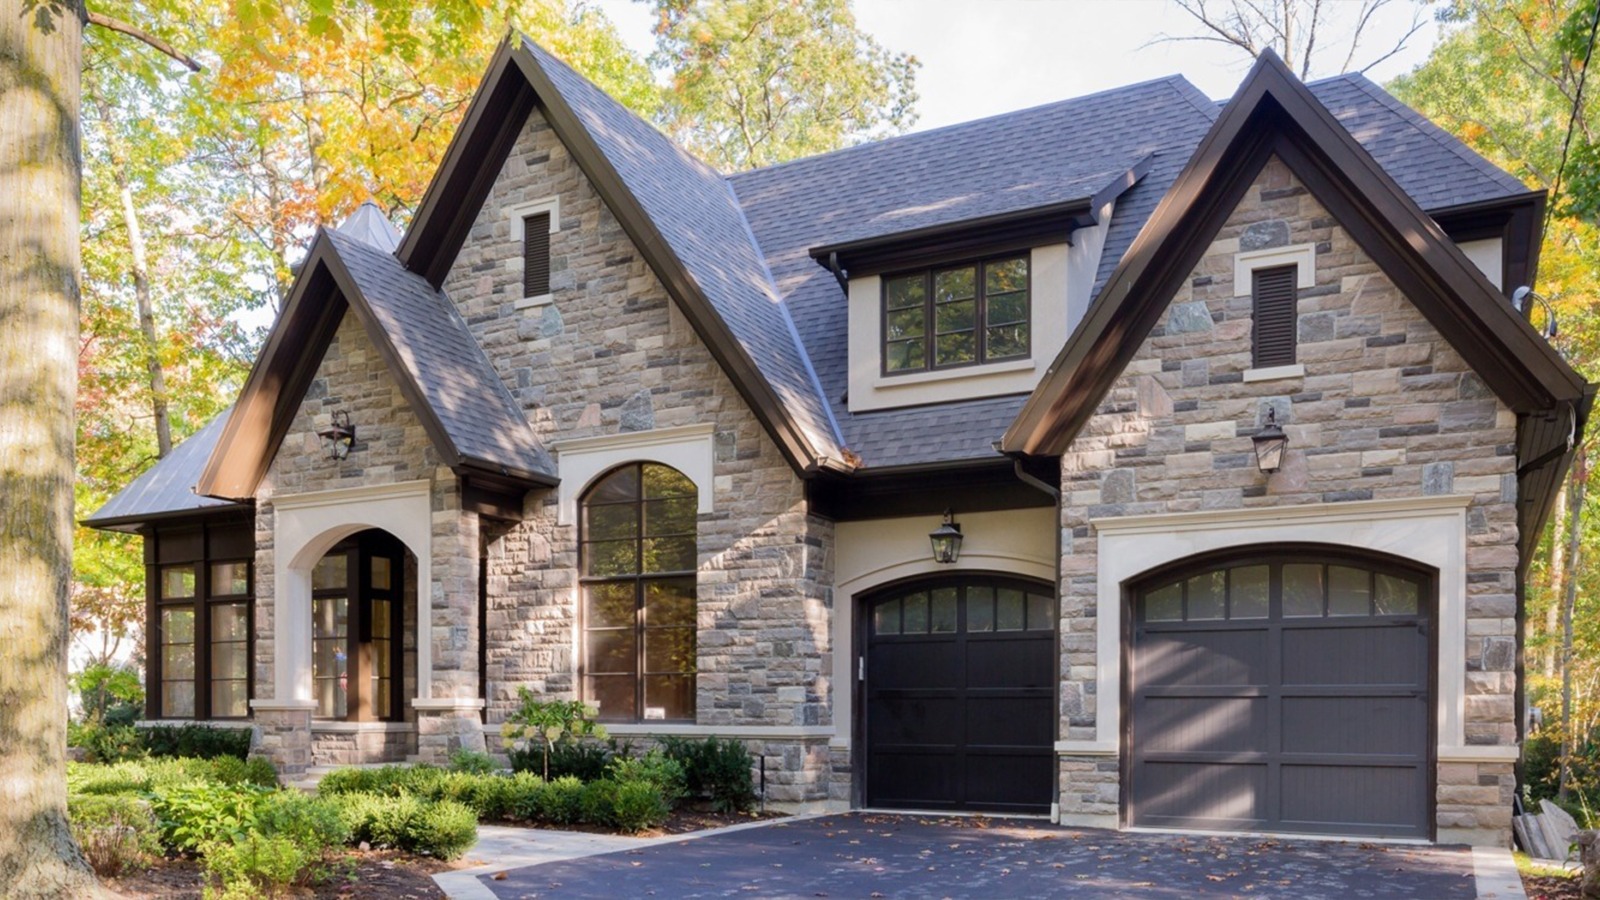 Mississauga house with arched window, dark garage door and gables.